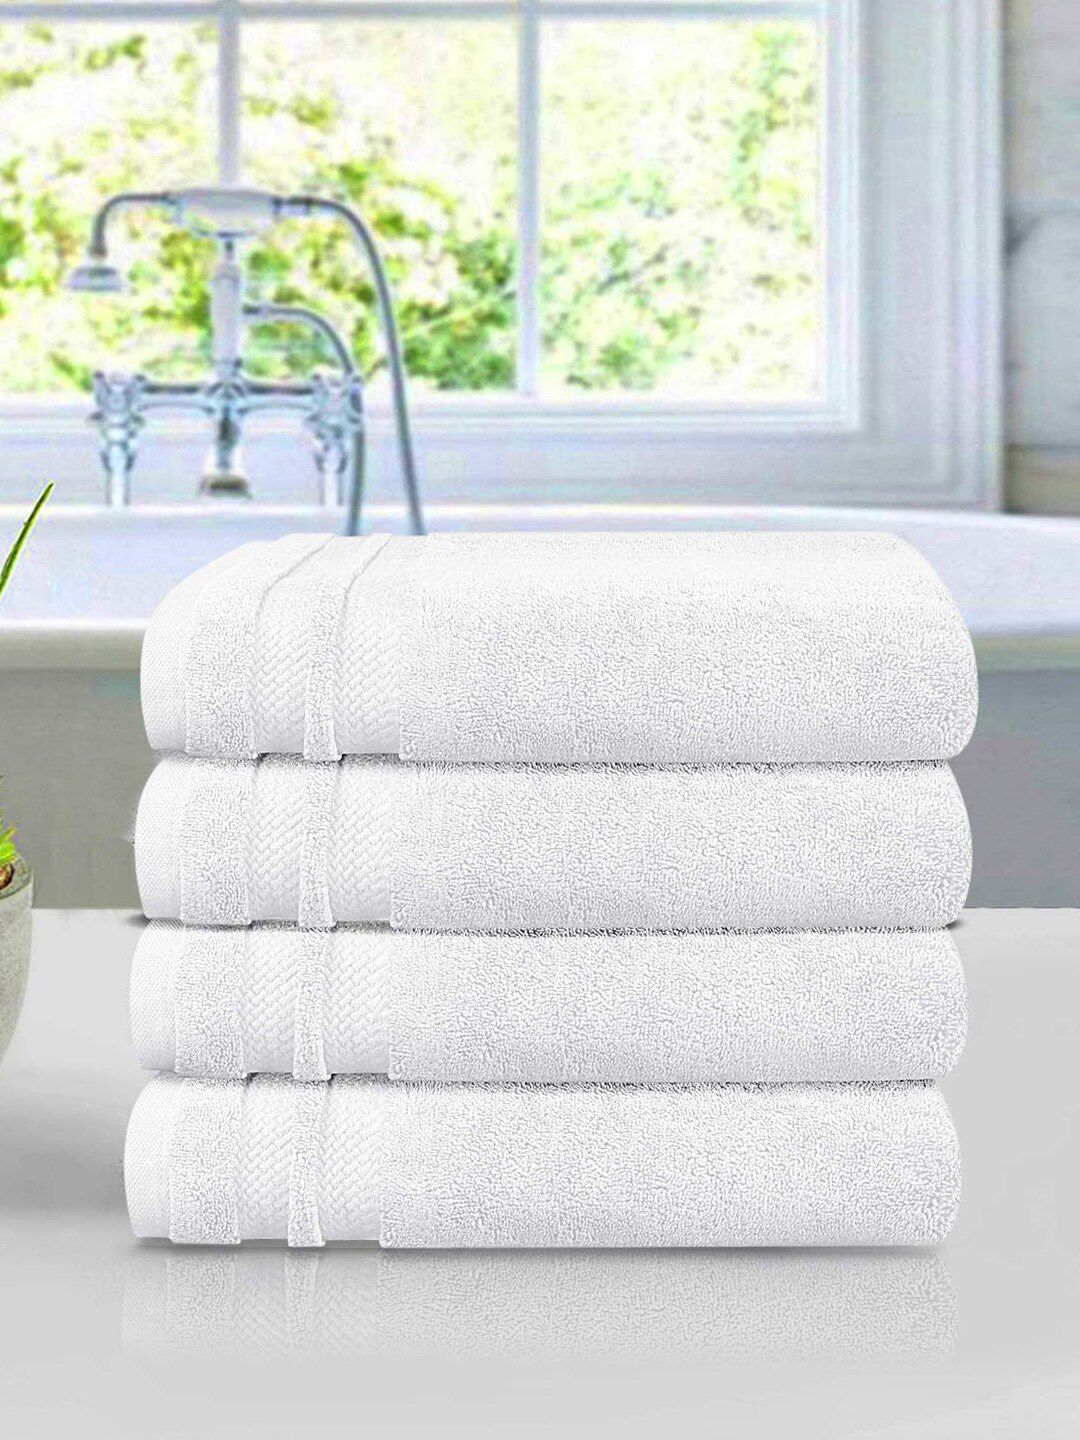 Trident 4 Piece Hand Towel Set White Luxury Collection 100% Cotton 625 GSM Price in India